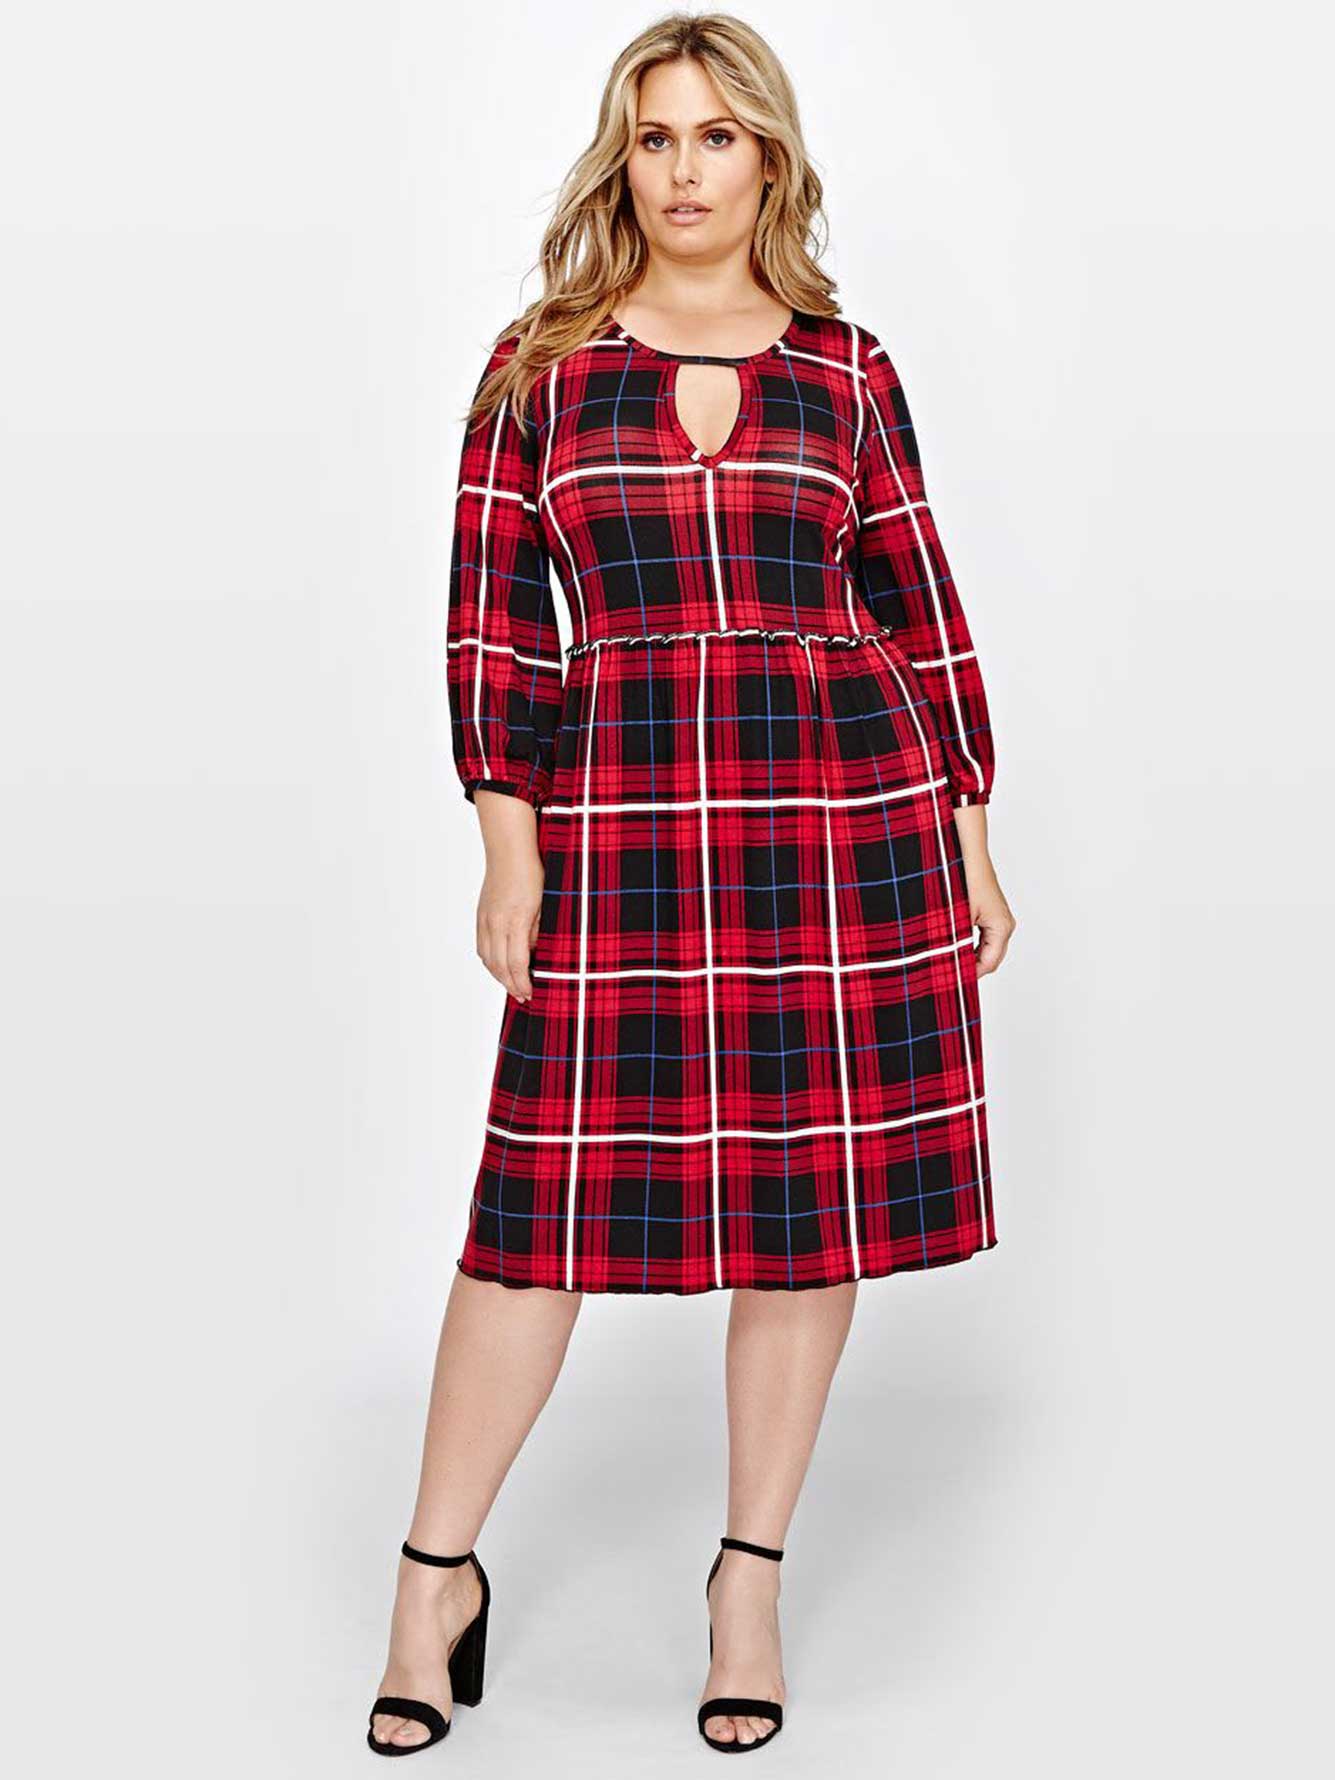 L&L Plaid dress with long sleeves | Addition Elle